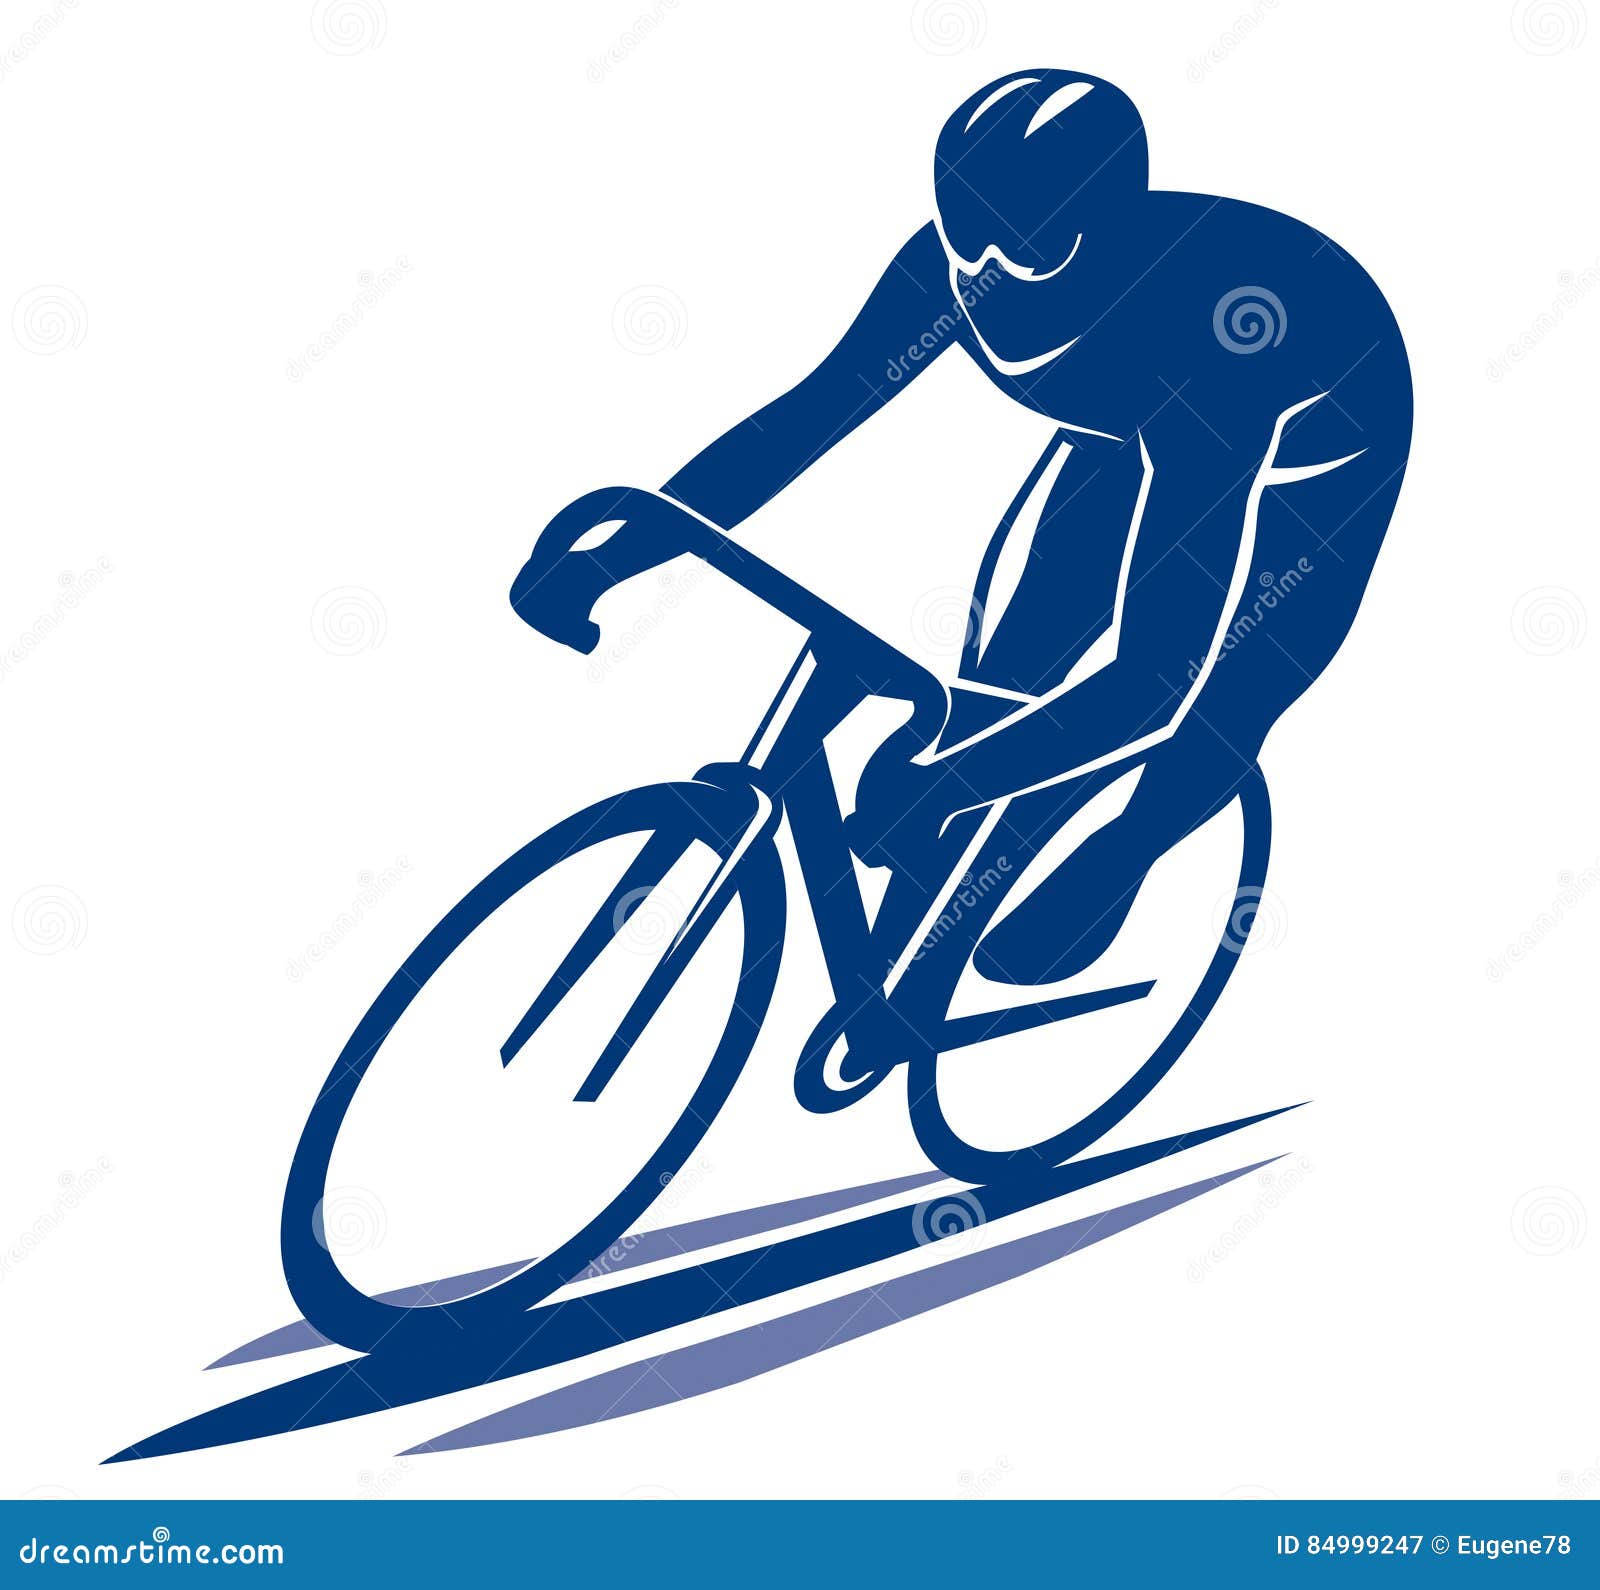 Peloton Cartoons, Illustrations & Vector Stock Images - 36 Pictures to